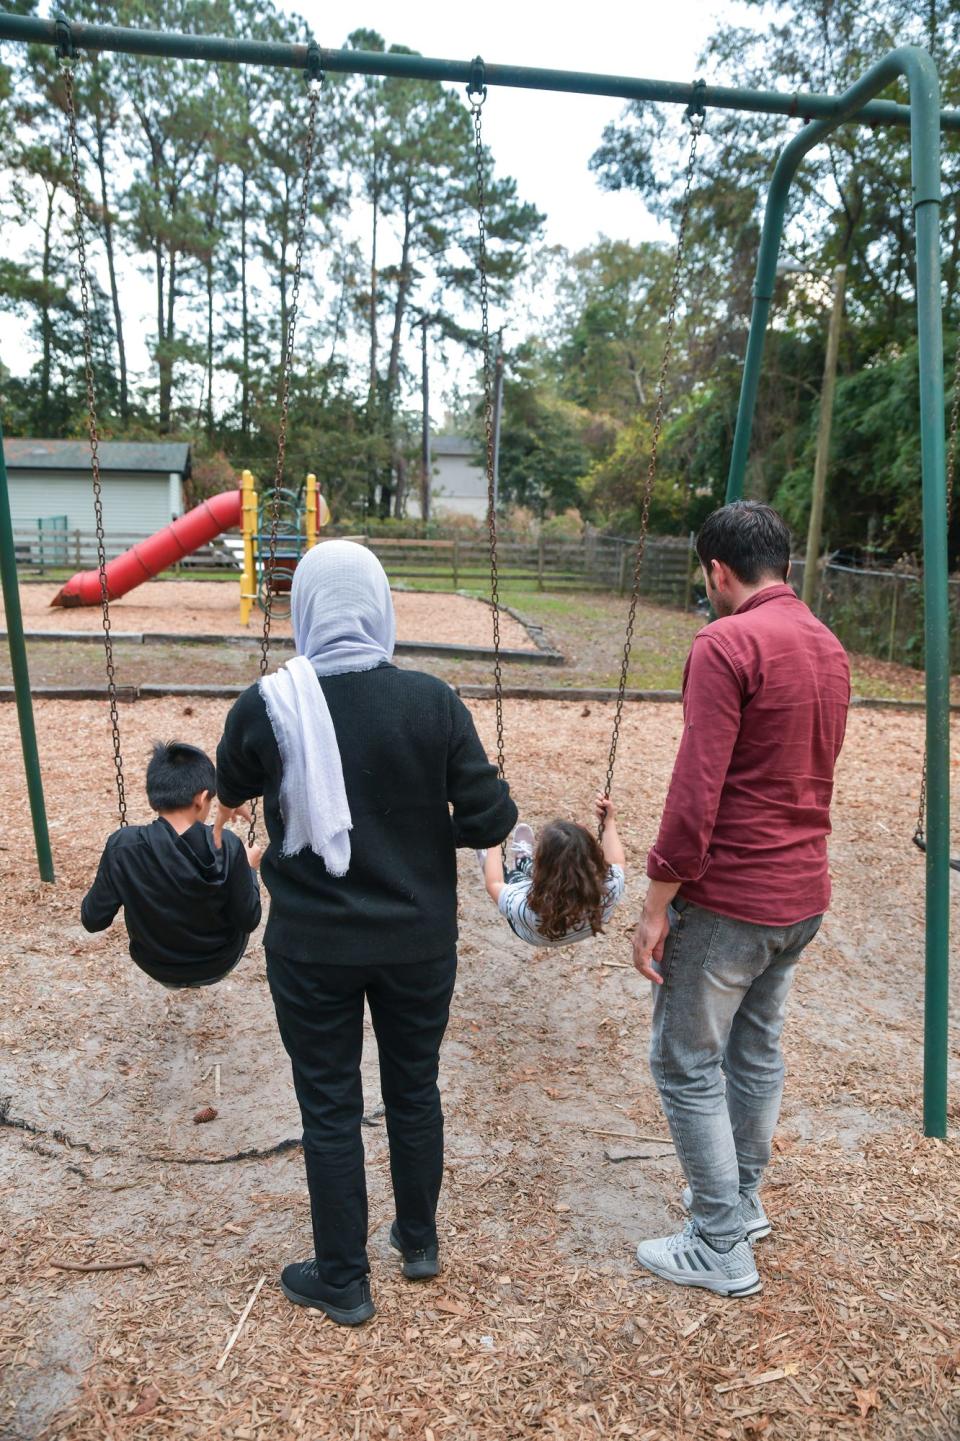 The playground offers some joy for the children and the adults who recently arrived in Savannah from Afghanistan.